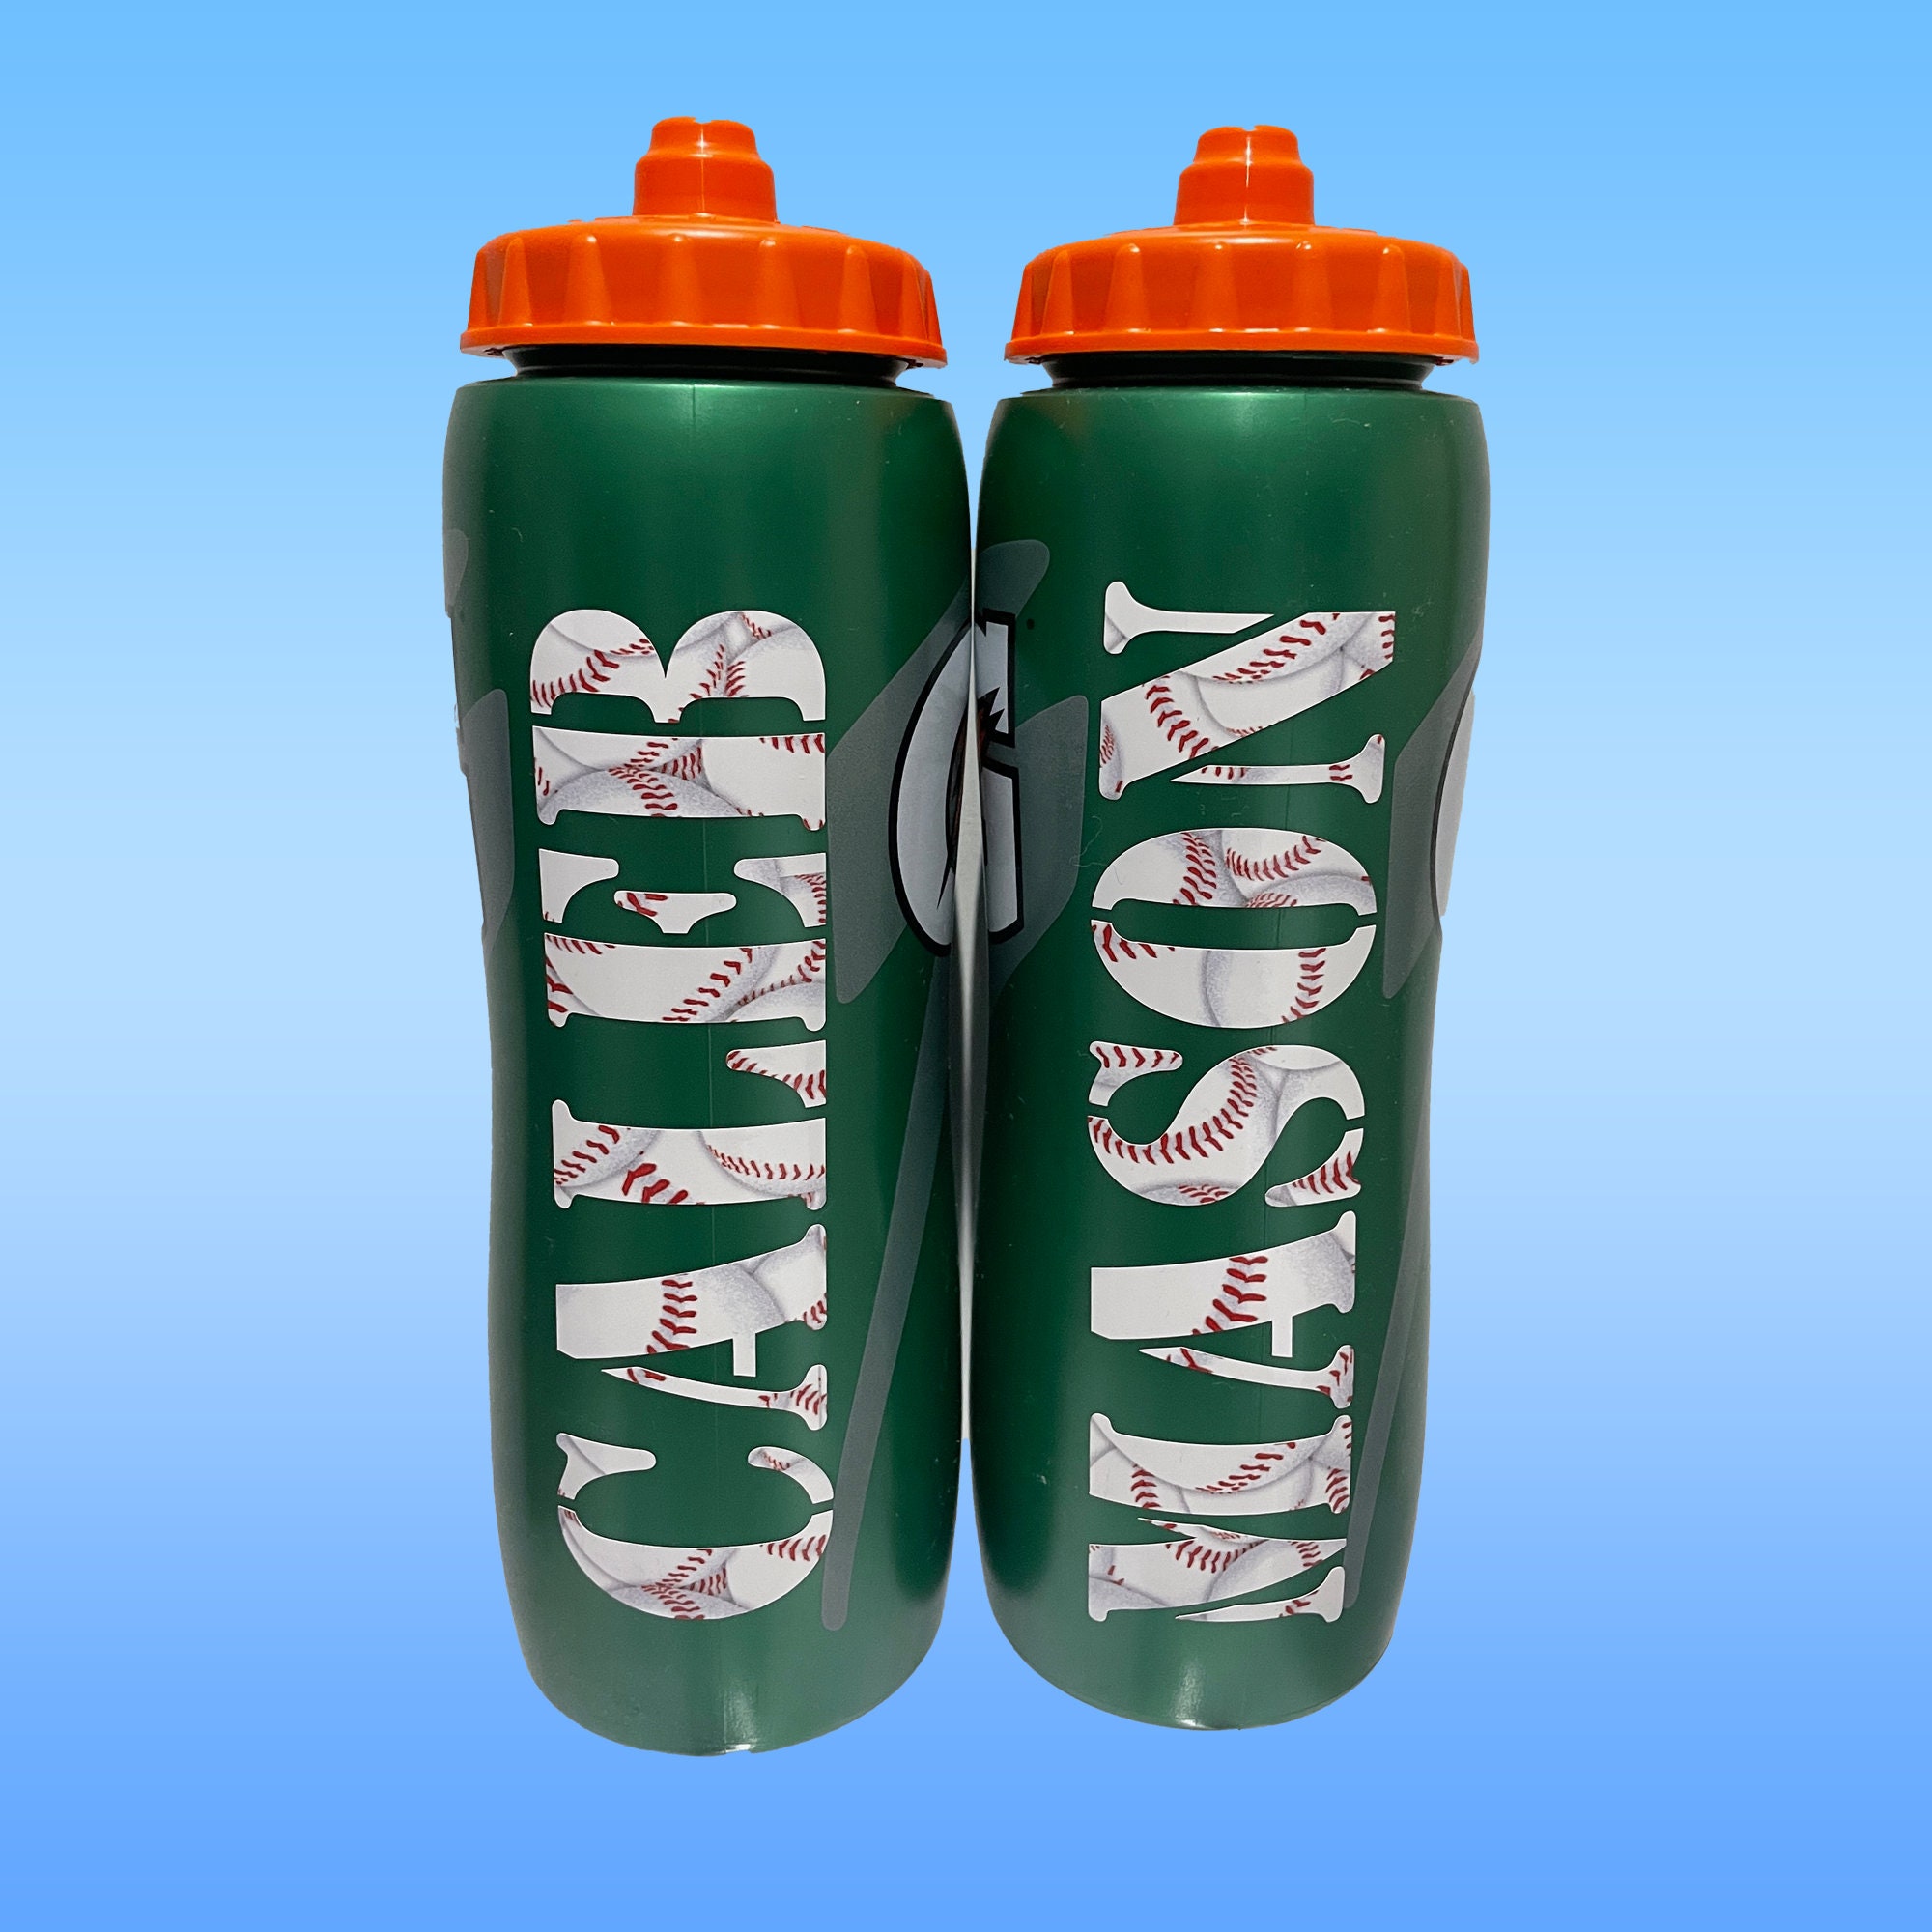 Personalized Baseball Sports Drink Bottle Labels - 24 Pc.